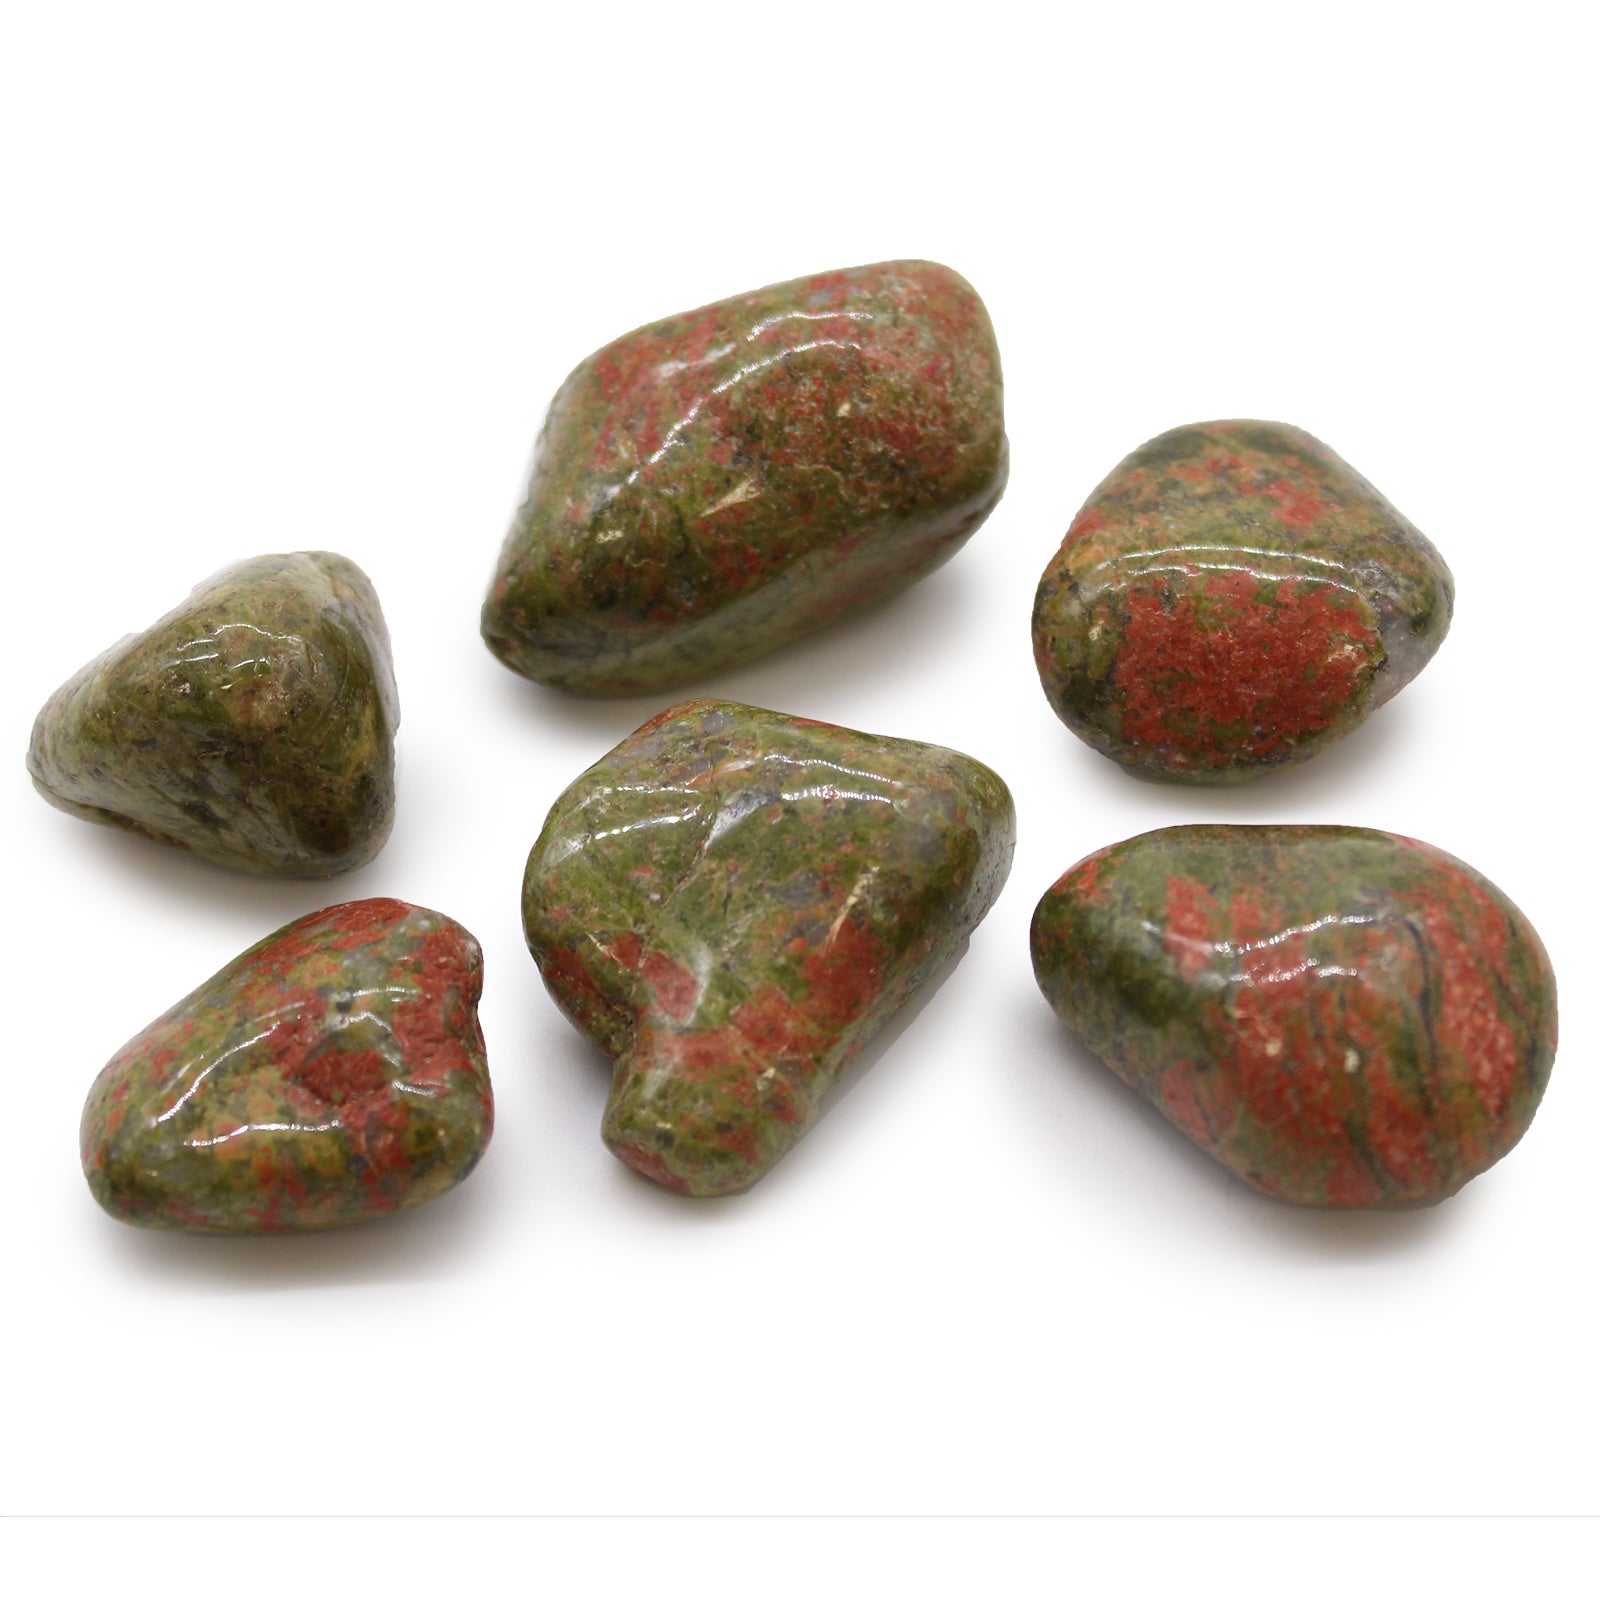 View Large African Tumble Stones Unakite information